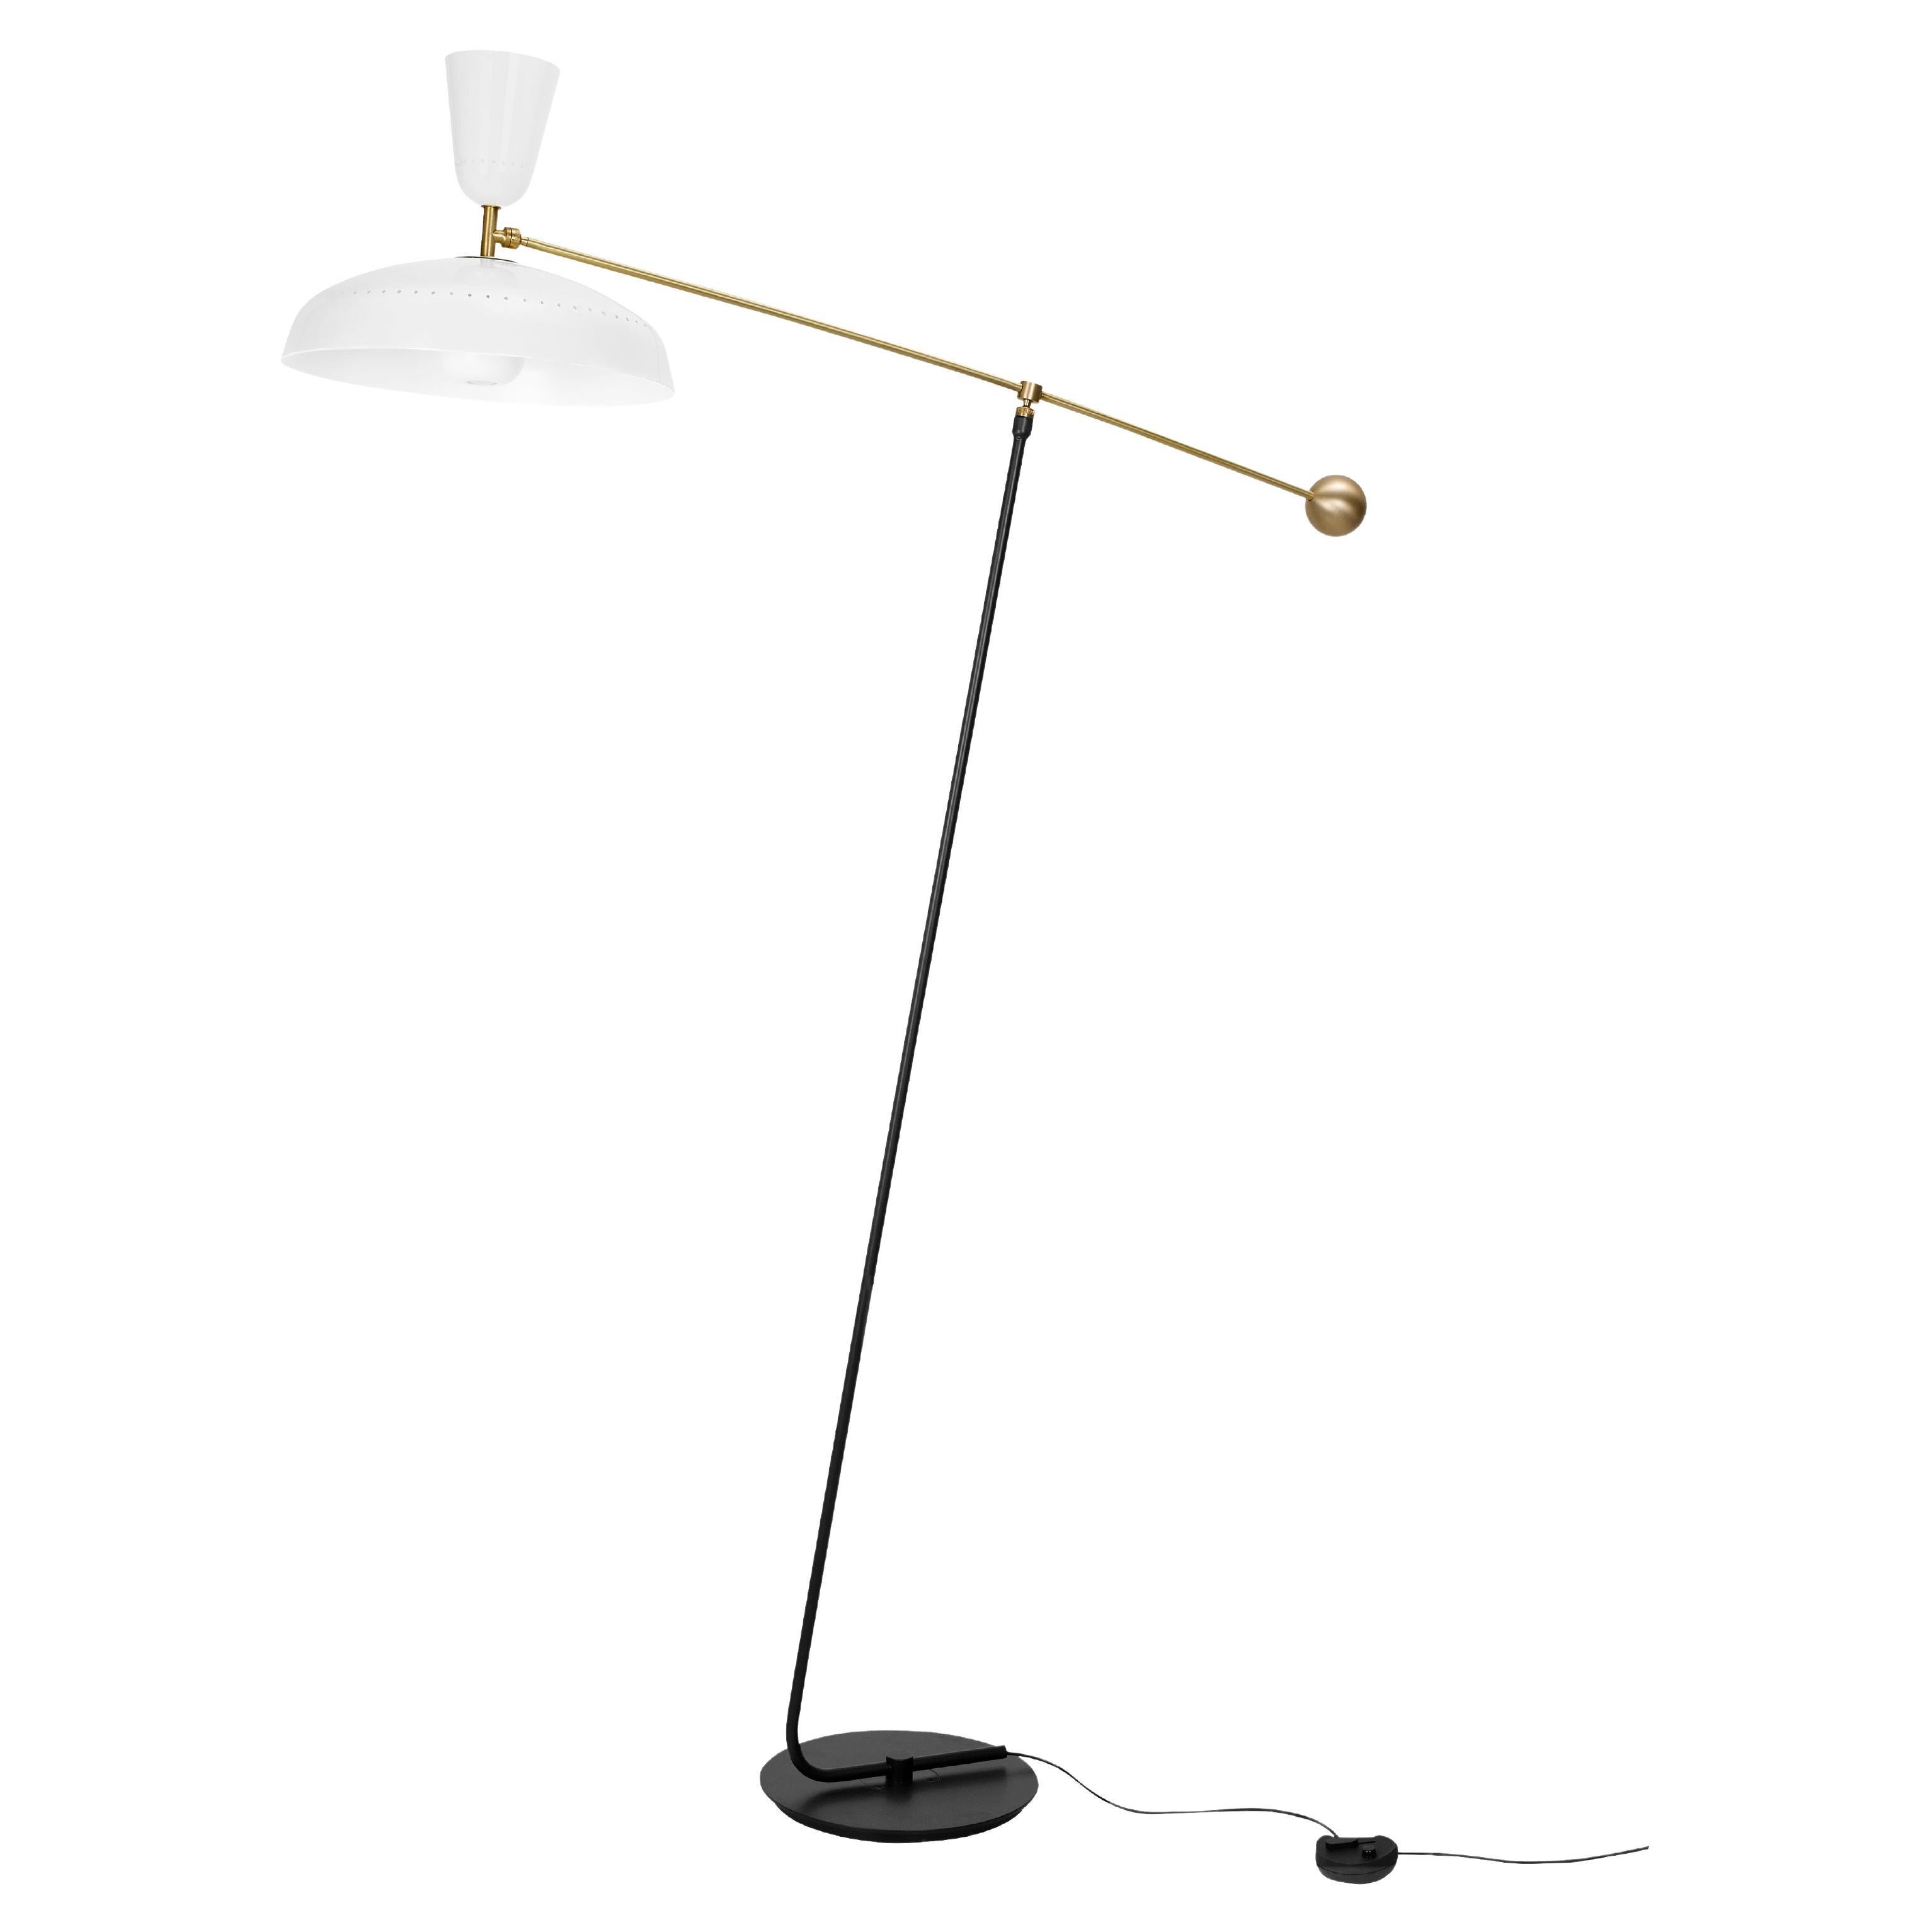 Large Pierre Guariche 'G1' Floor Lamp for Sammode Studio in Chalk In New Condition For Sale In Glendale, CA